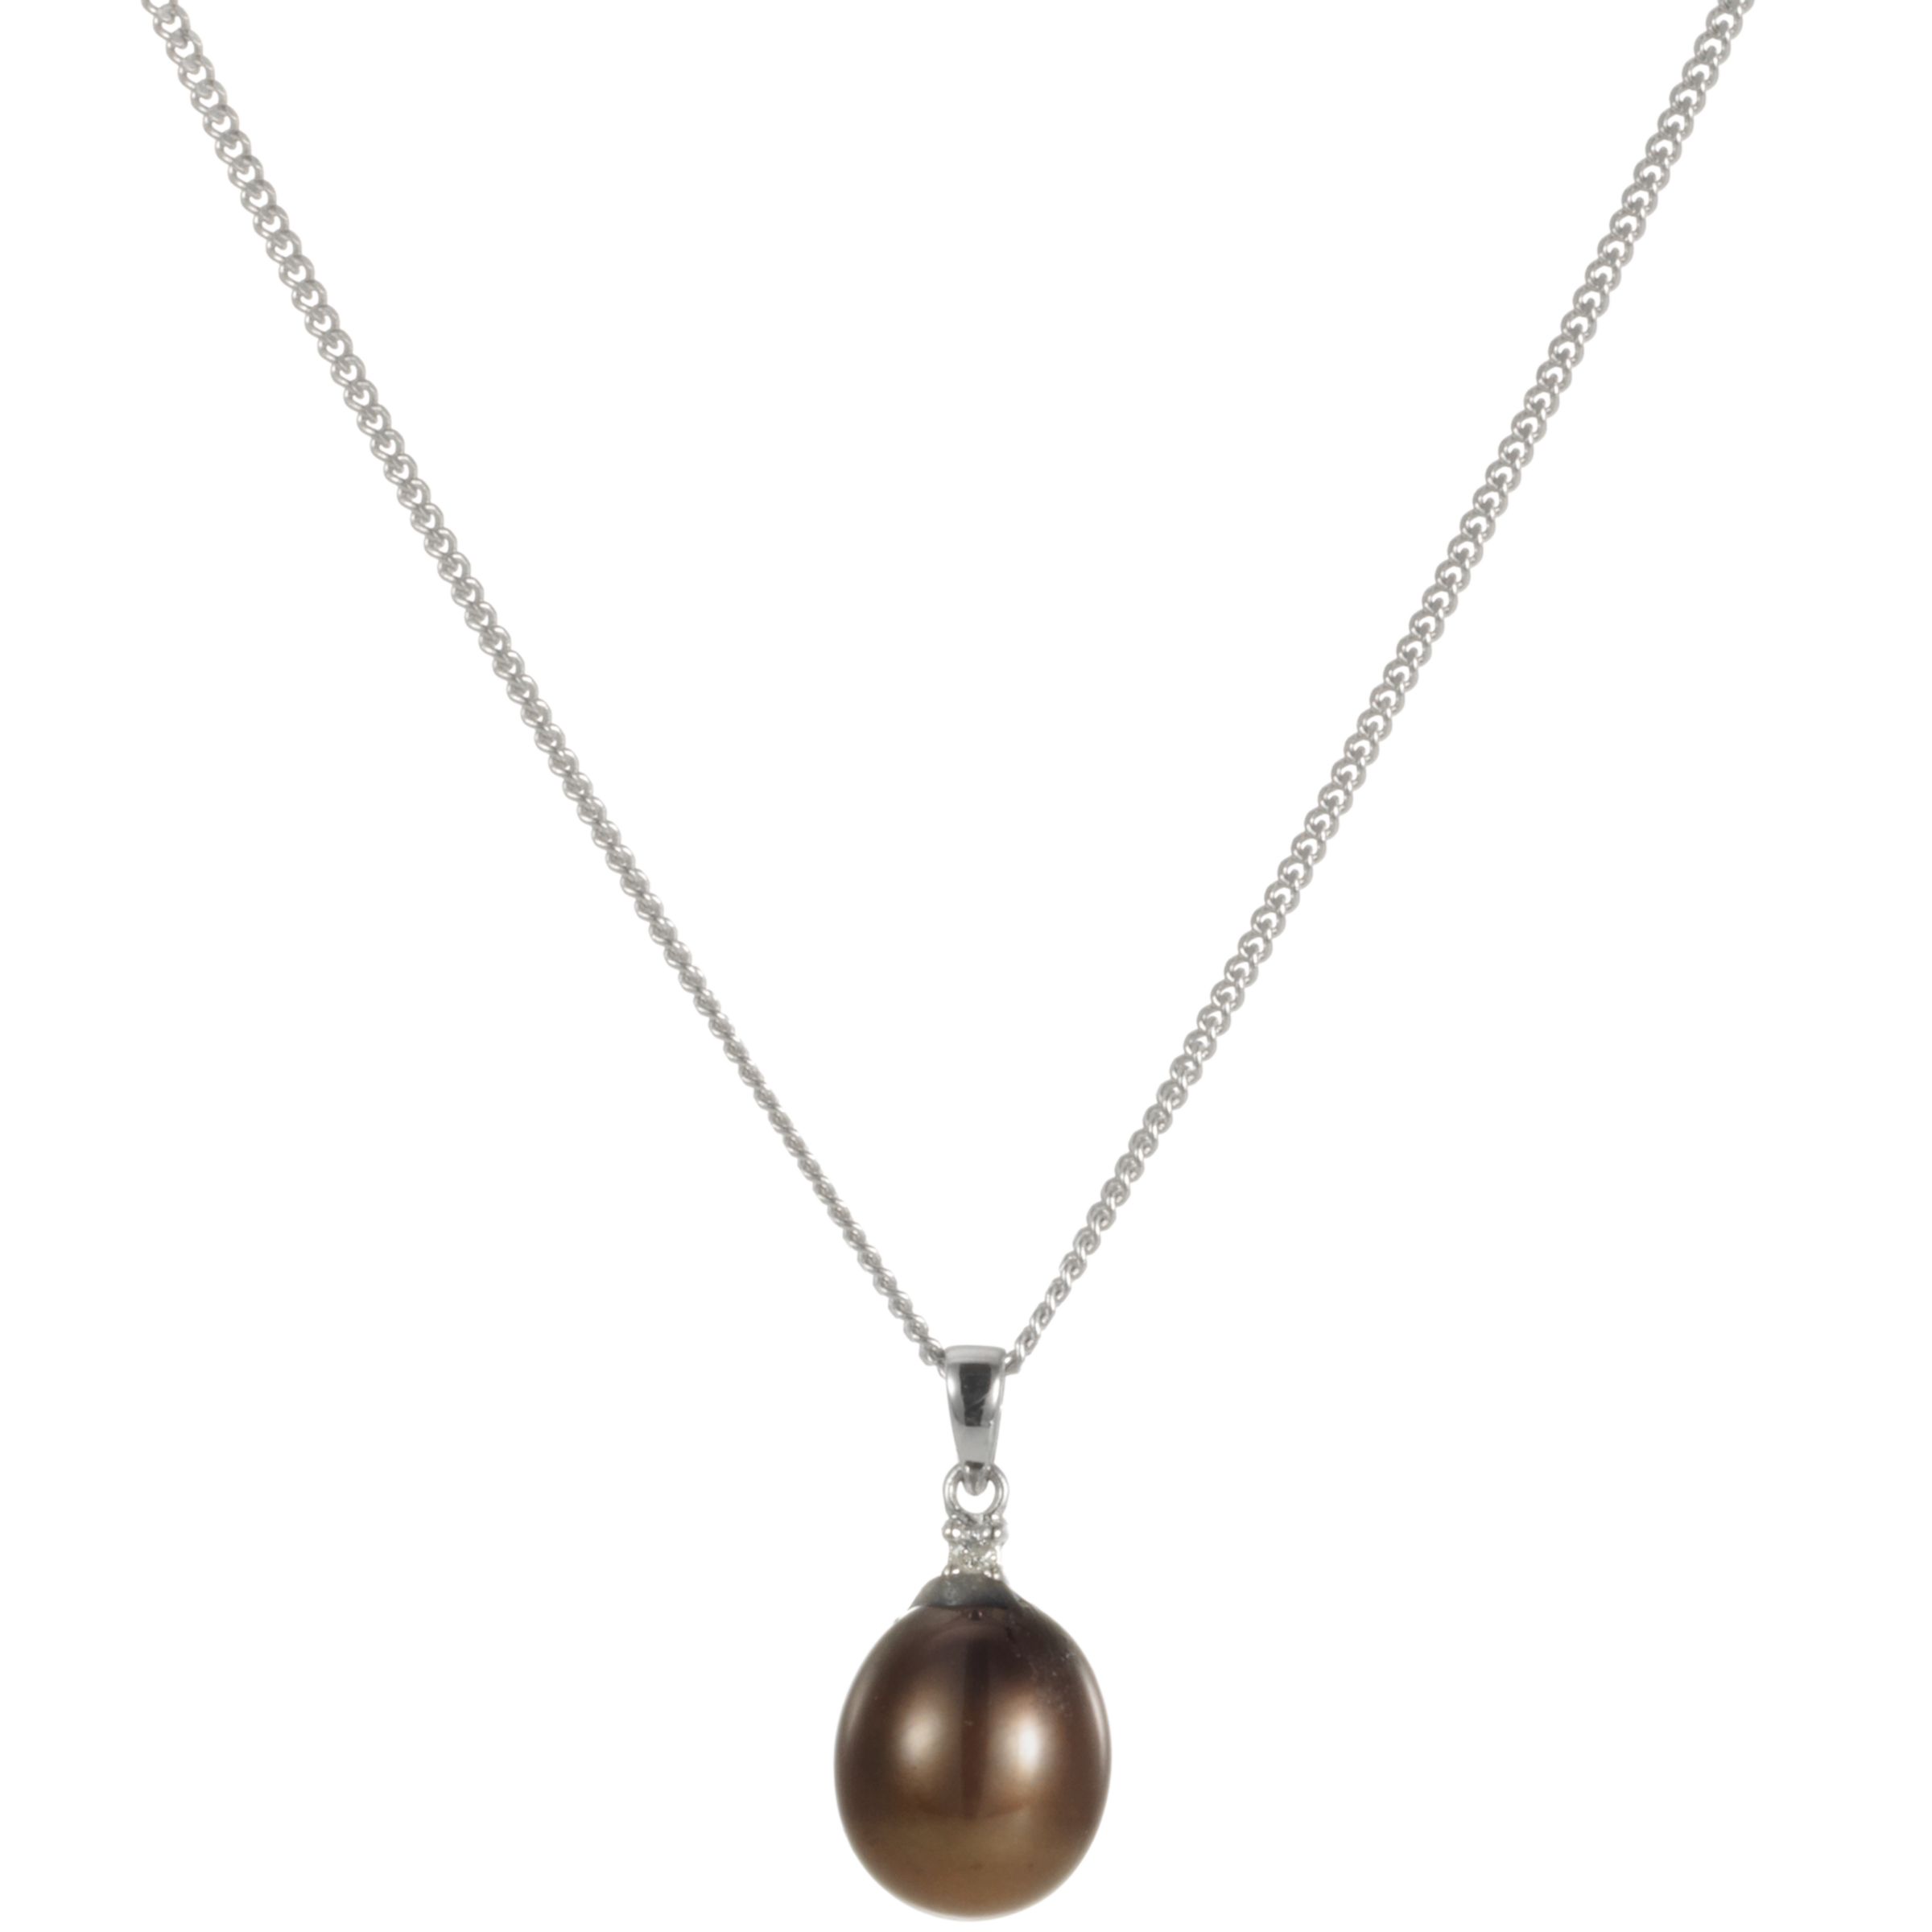 9ct White Gold Chocolate Freshwater Pearl and Diamond Pendant Necklace